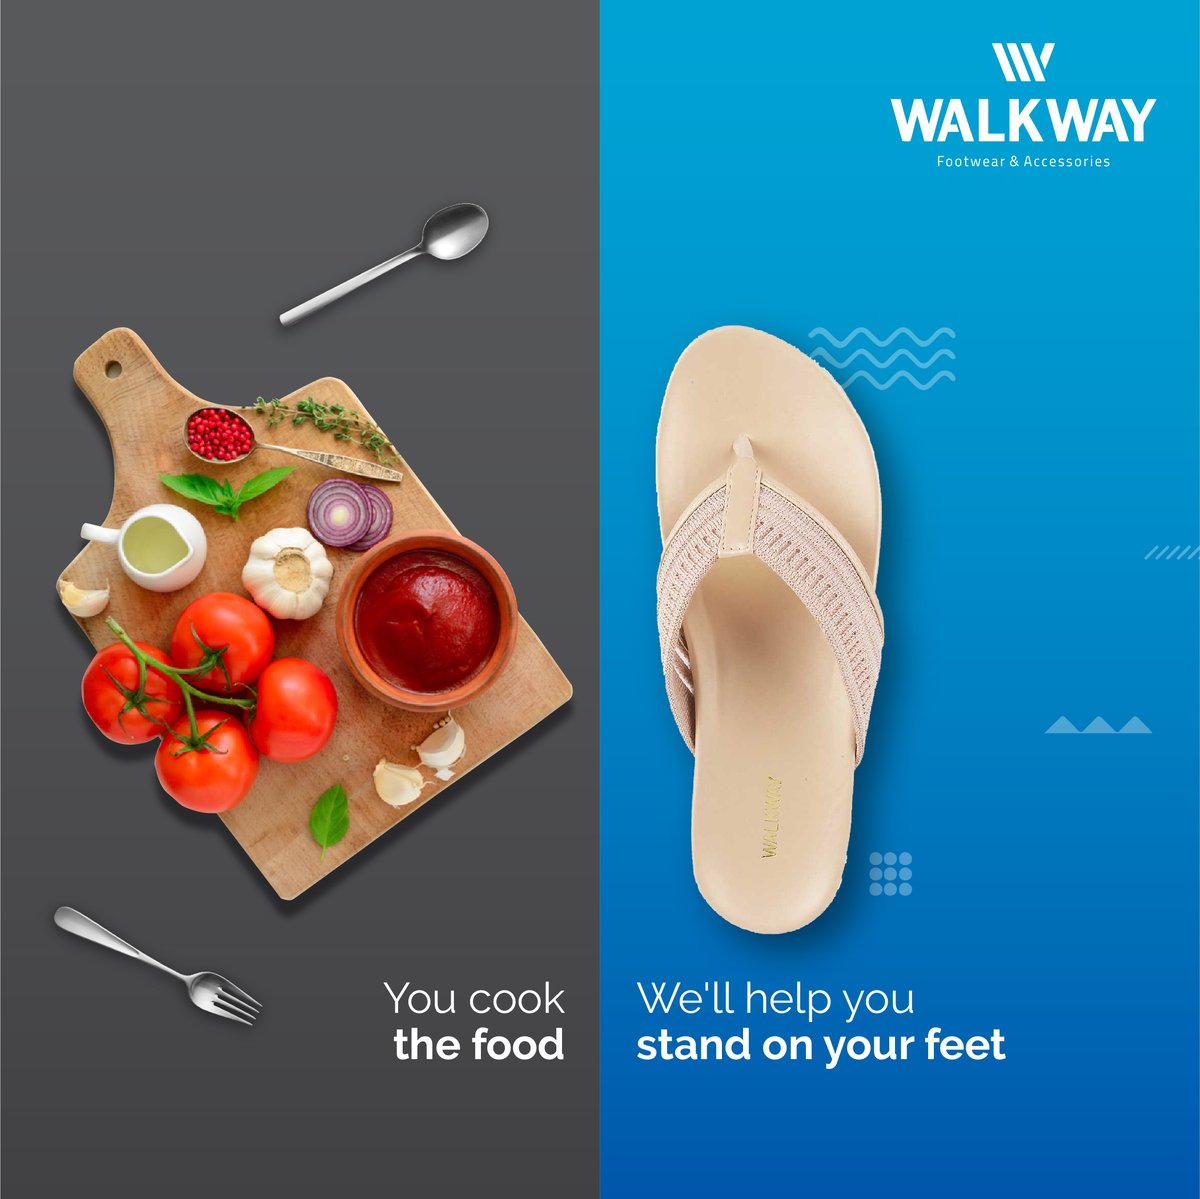 Now make cooking sessions a lot more fun and exciting with our trendy and stylish footwear that is designed to keep you going all day on your feet!

#walkway #trendeveryday #casualwear #casualook #newfashion #slipons #ladieschappal #womensfootwear #trending #budgetshopping